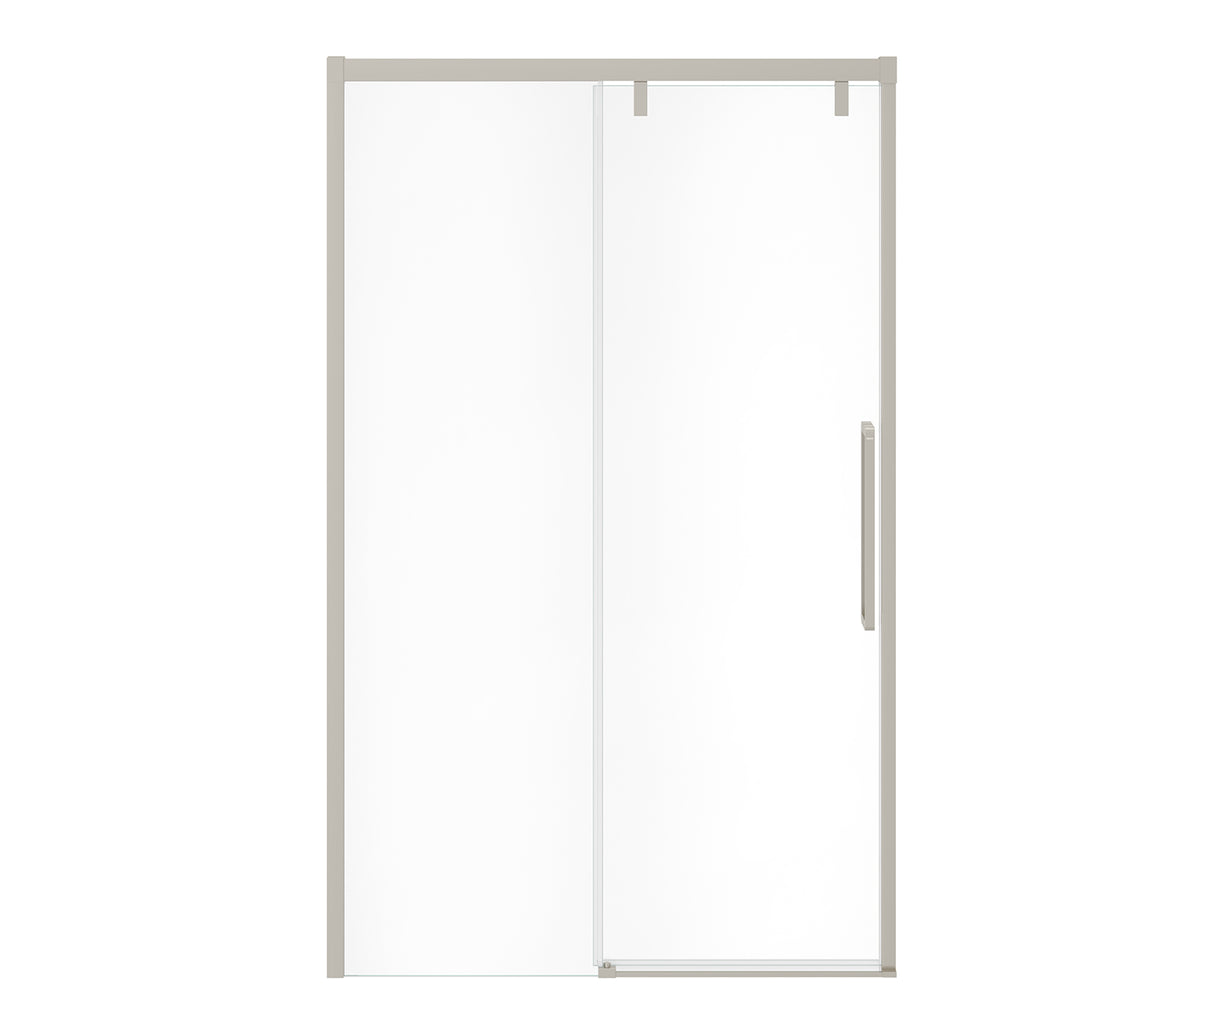 MAAX 135323-900-305-000 Uptown 44-47 x 76 in. 8 mm Sliding Shower Door for Alcove Installation with Clear glass in Brushed Nickel